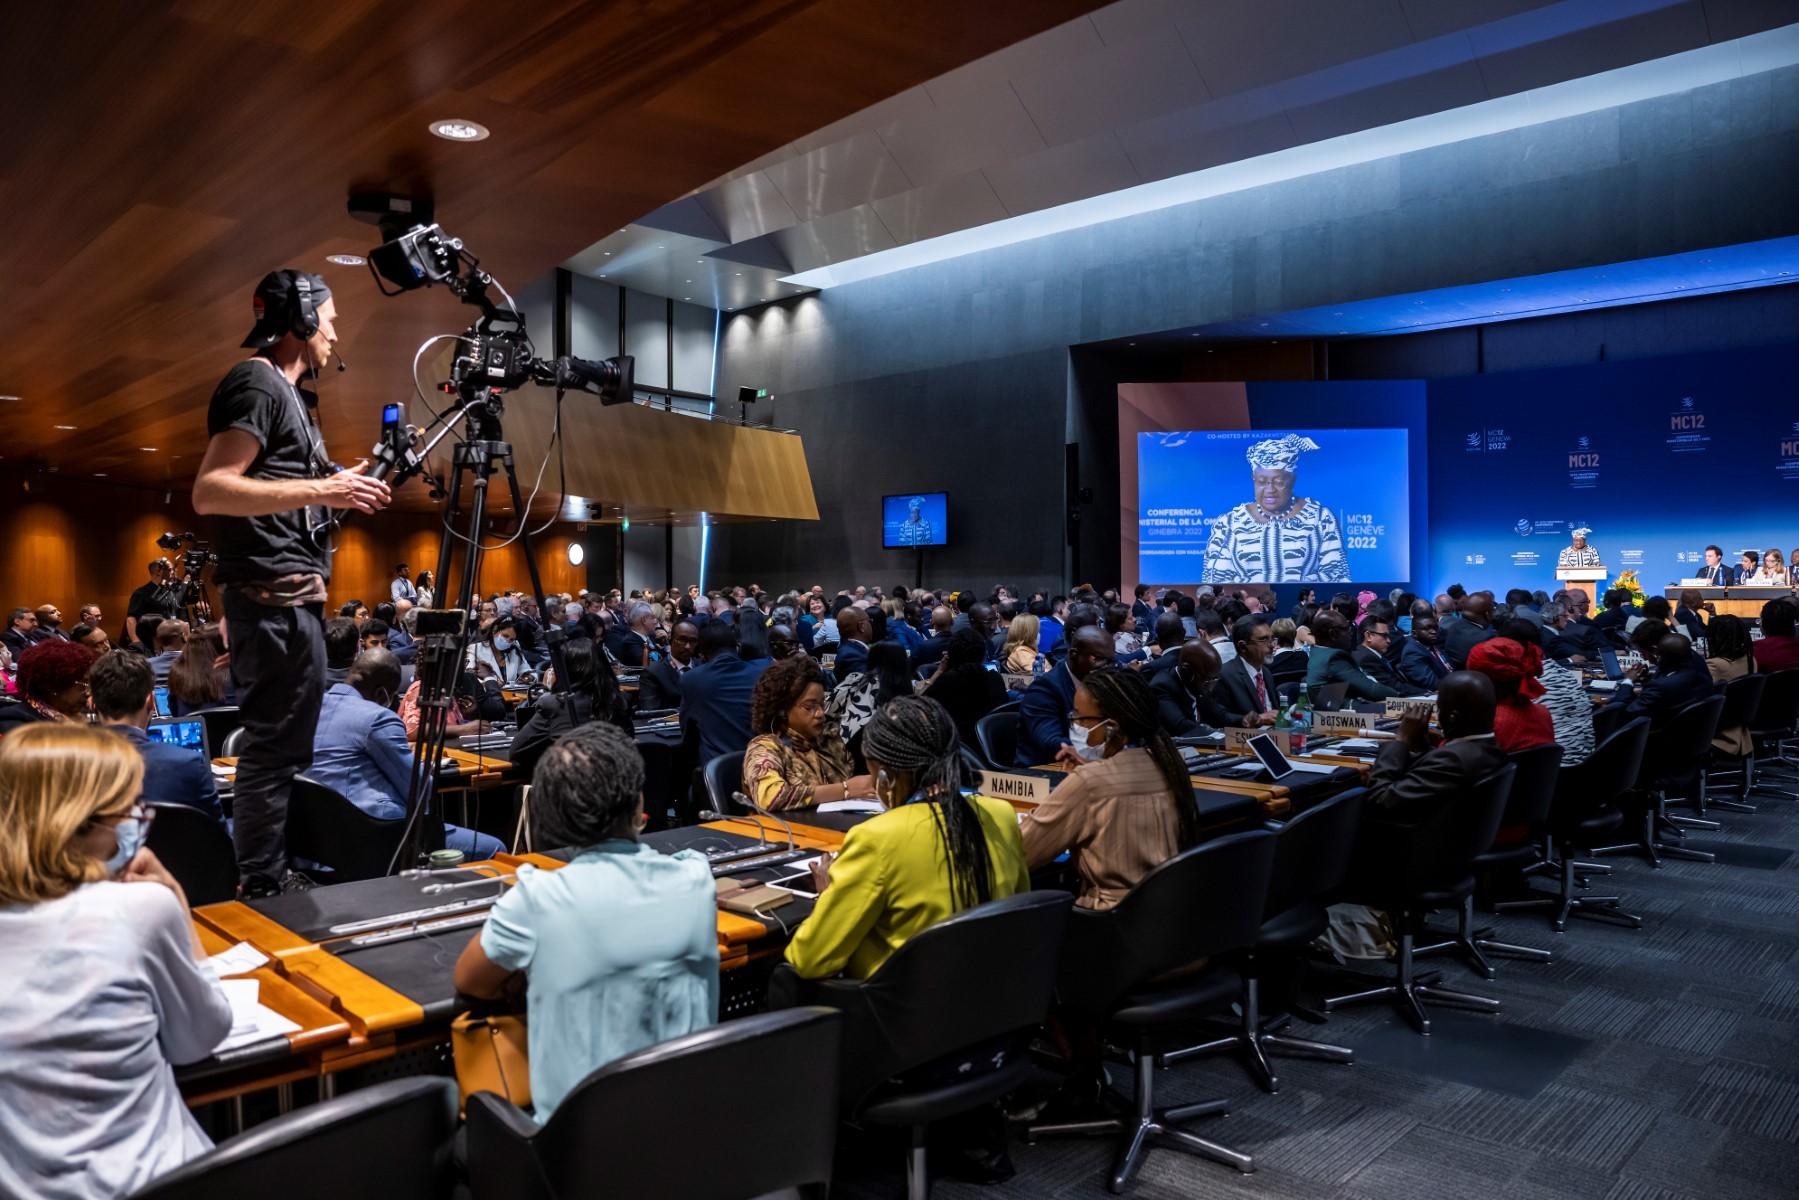 Official delegations listen to the speech of the director-general of the World Trade Organization, Ngozi Okonjo-Iweala, at the opening ceremony of the 12th ministerial conference at the WTO headquarters in Geneva, on June 12. Photo: AFP